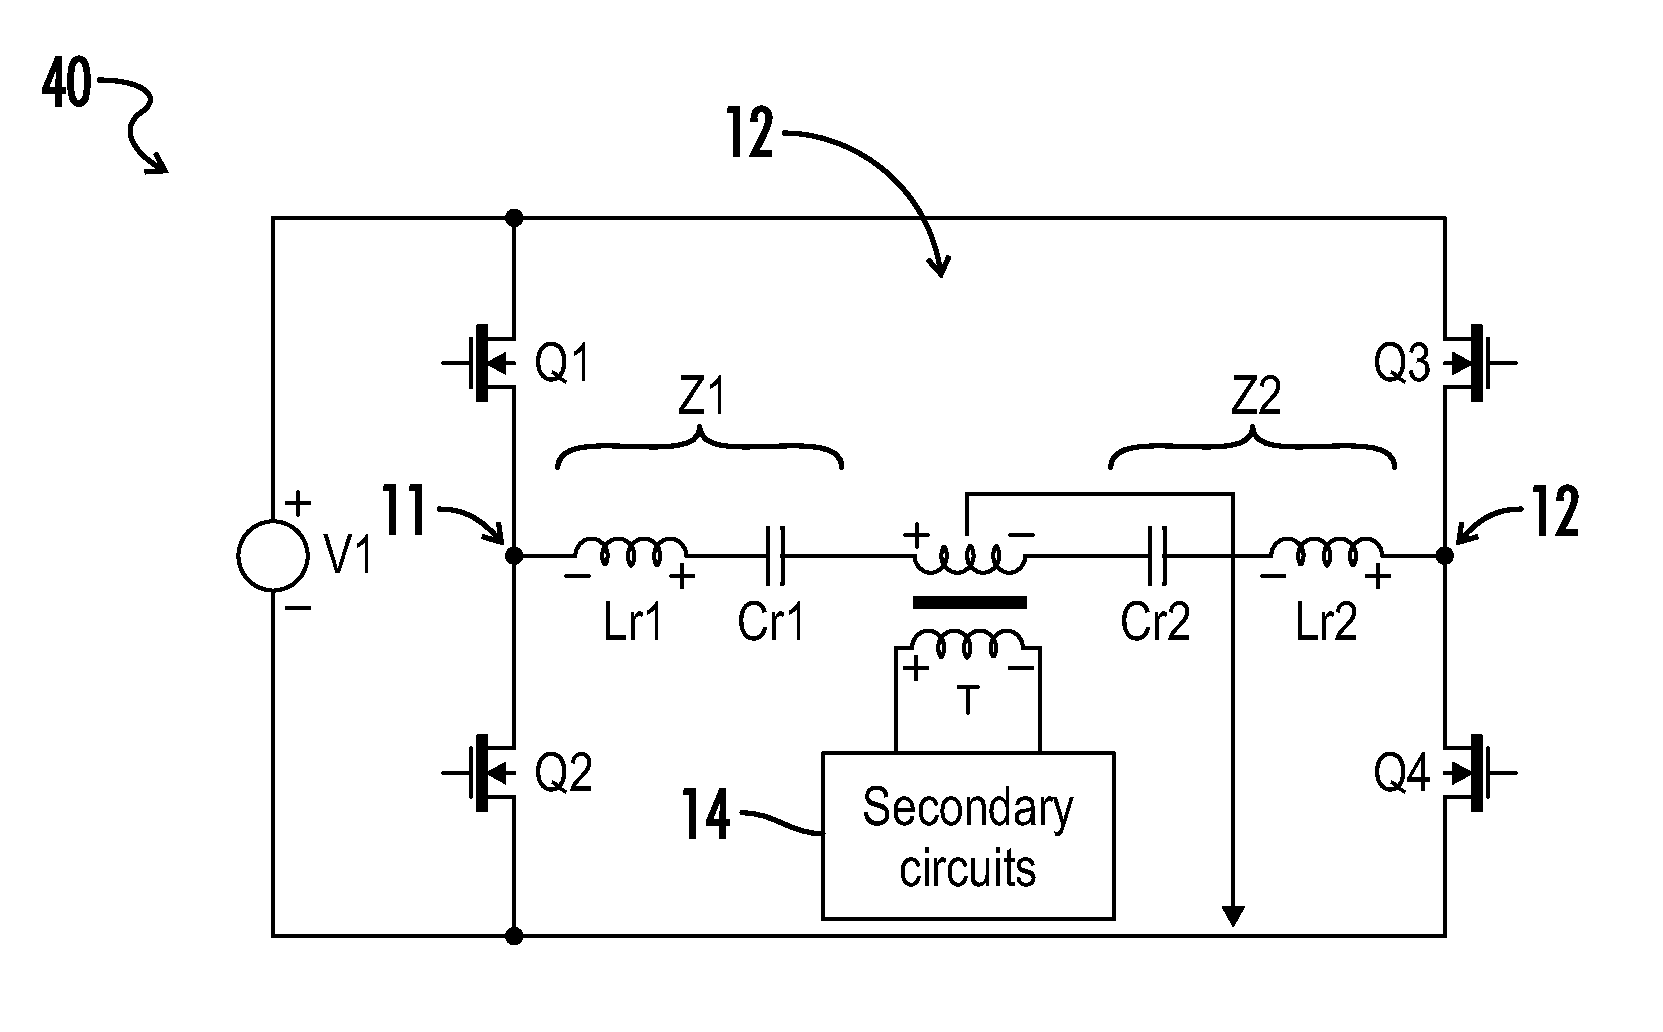 Circuit and method for managing common mode noise in isolated resonant DC-DC power converters